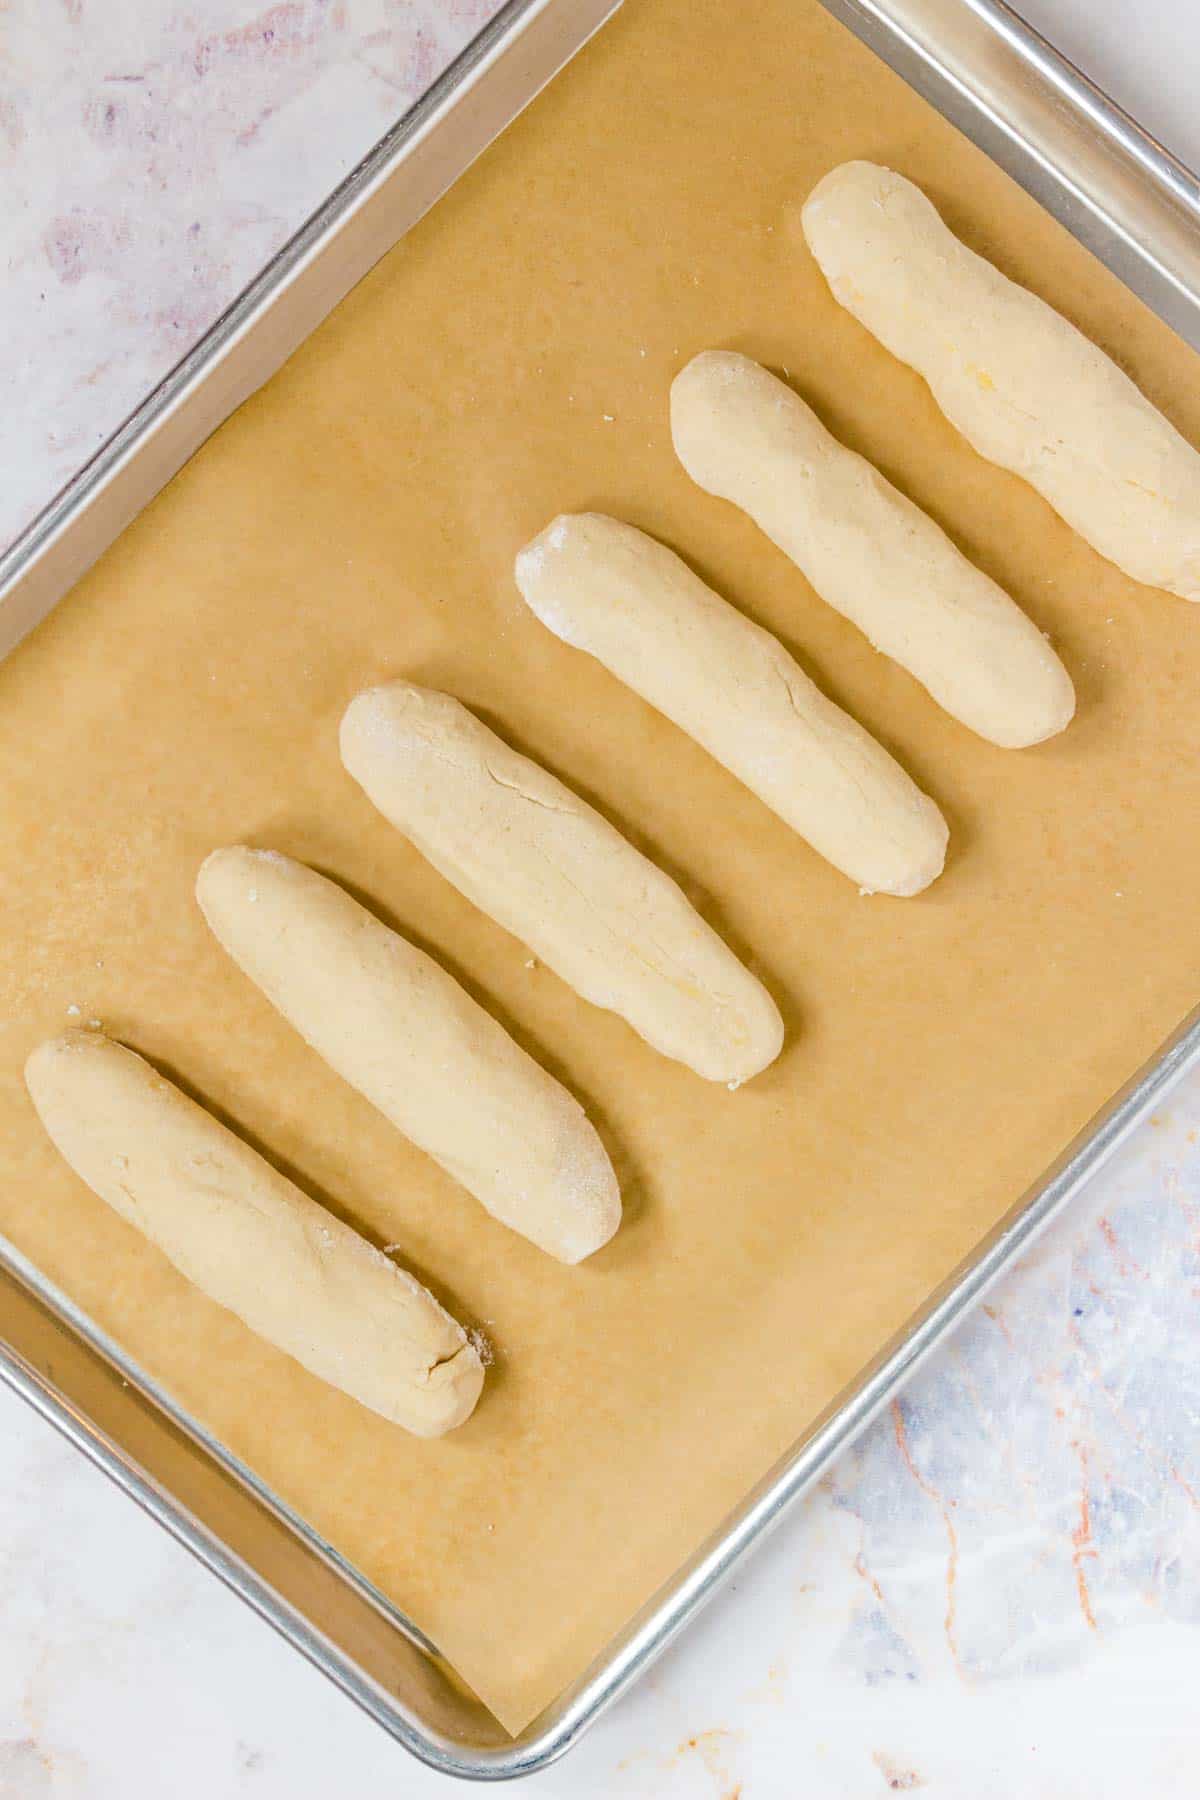 A row of rolled, unbaked breadstick dough on a baking tray.